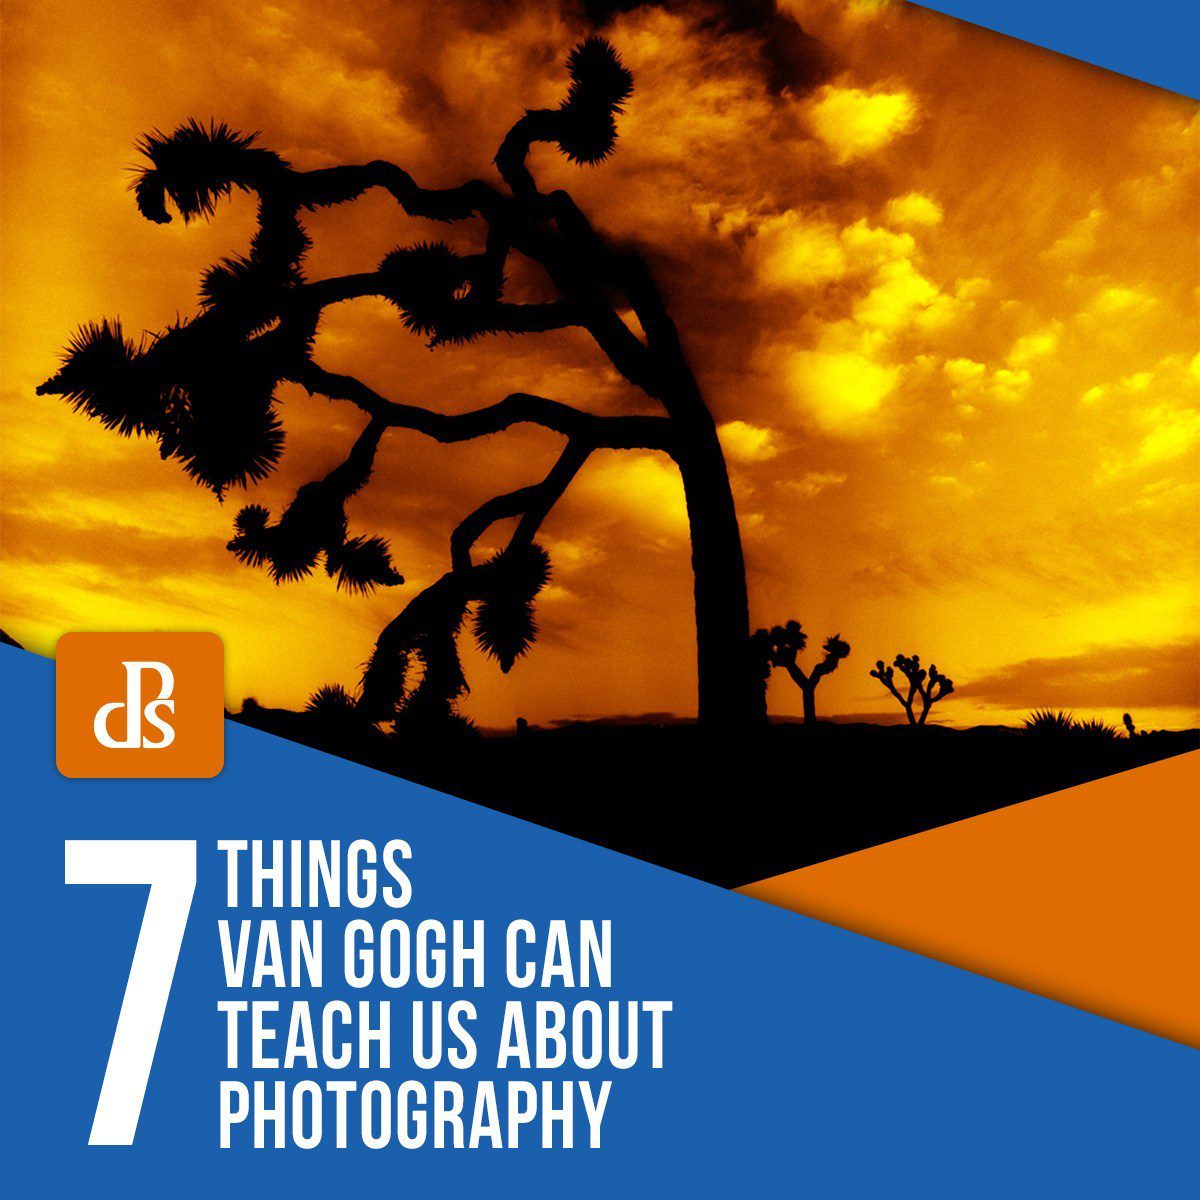 7 Things Van Gogh Can Teach Us About Photography